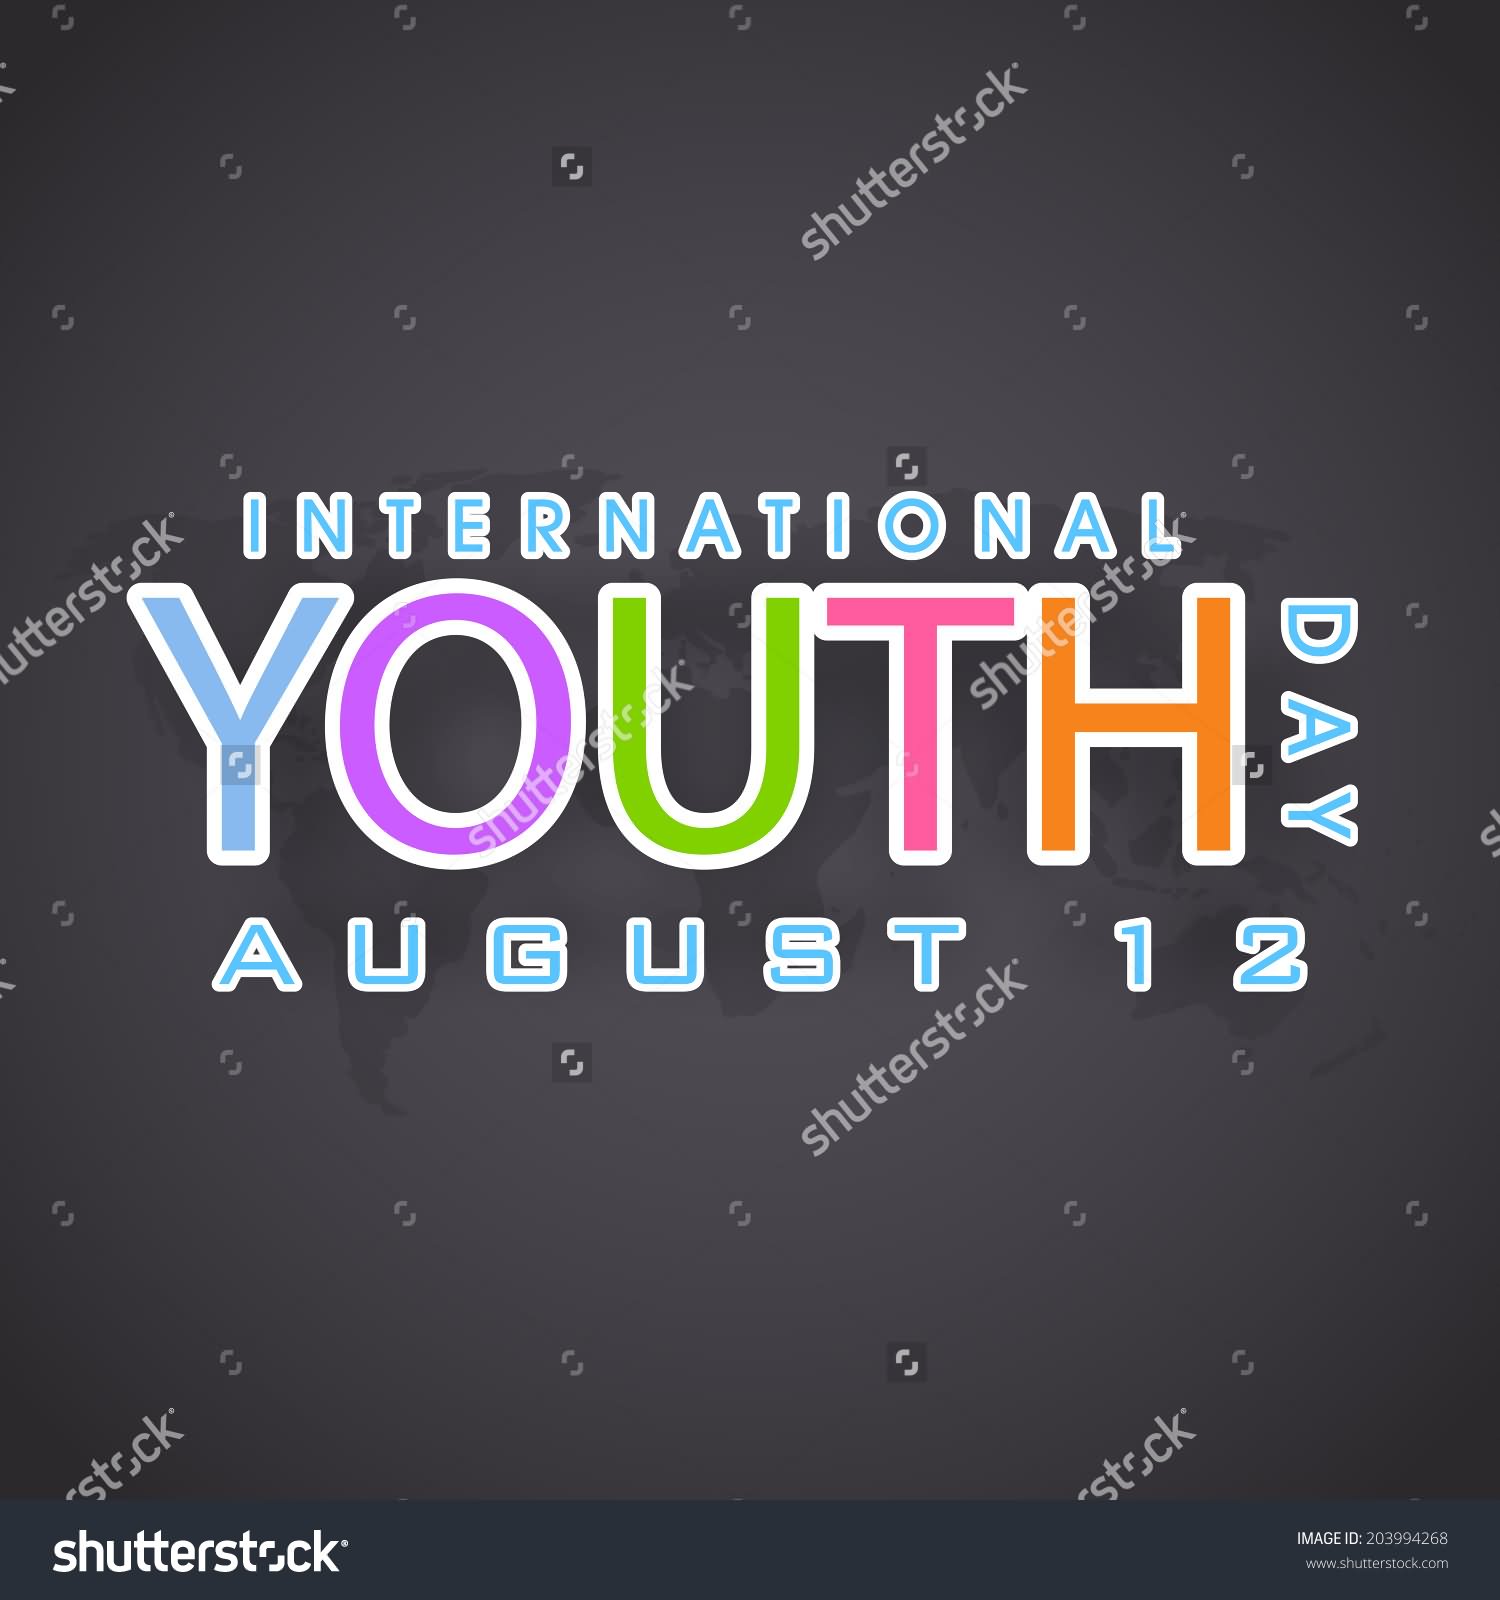 International Youth Day August 12 Colorful Stylish Text Picture